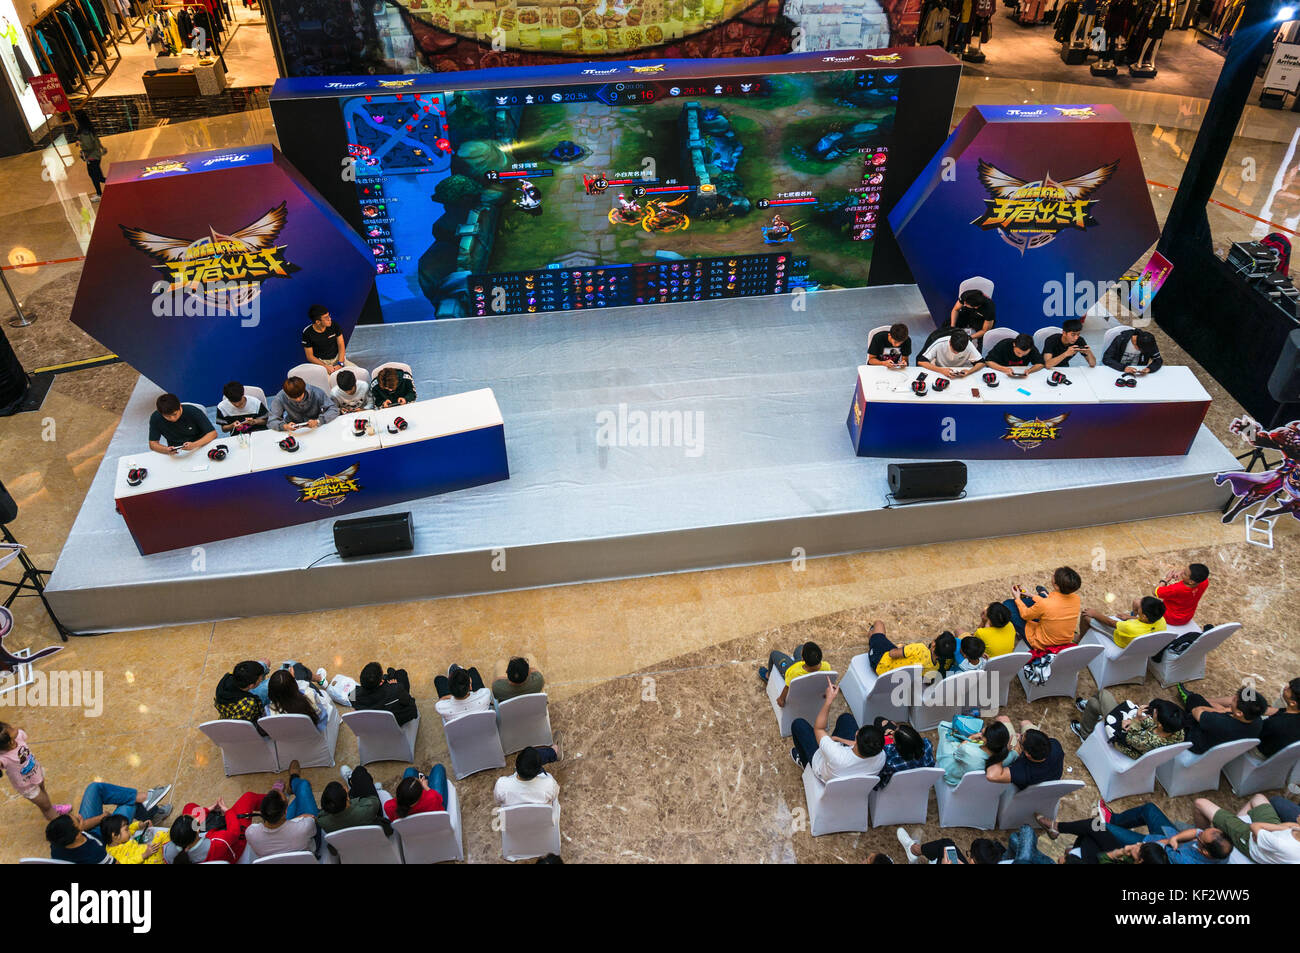 MOBA multiplayer online battle arena video game competition, Kings Smackdown, a League of Legends style game, 5v5, in Shenzhen, China Stock Photo